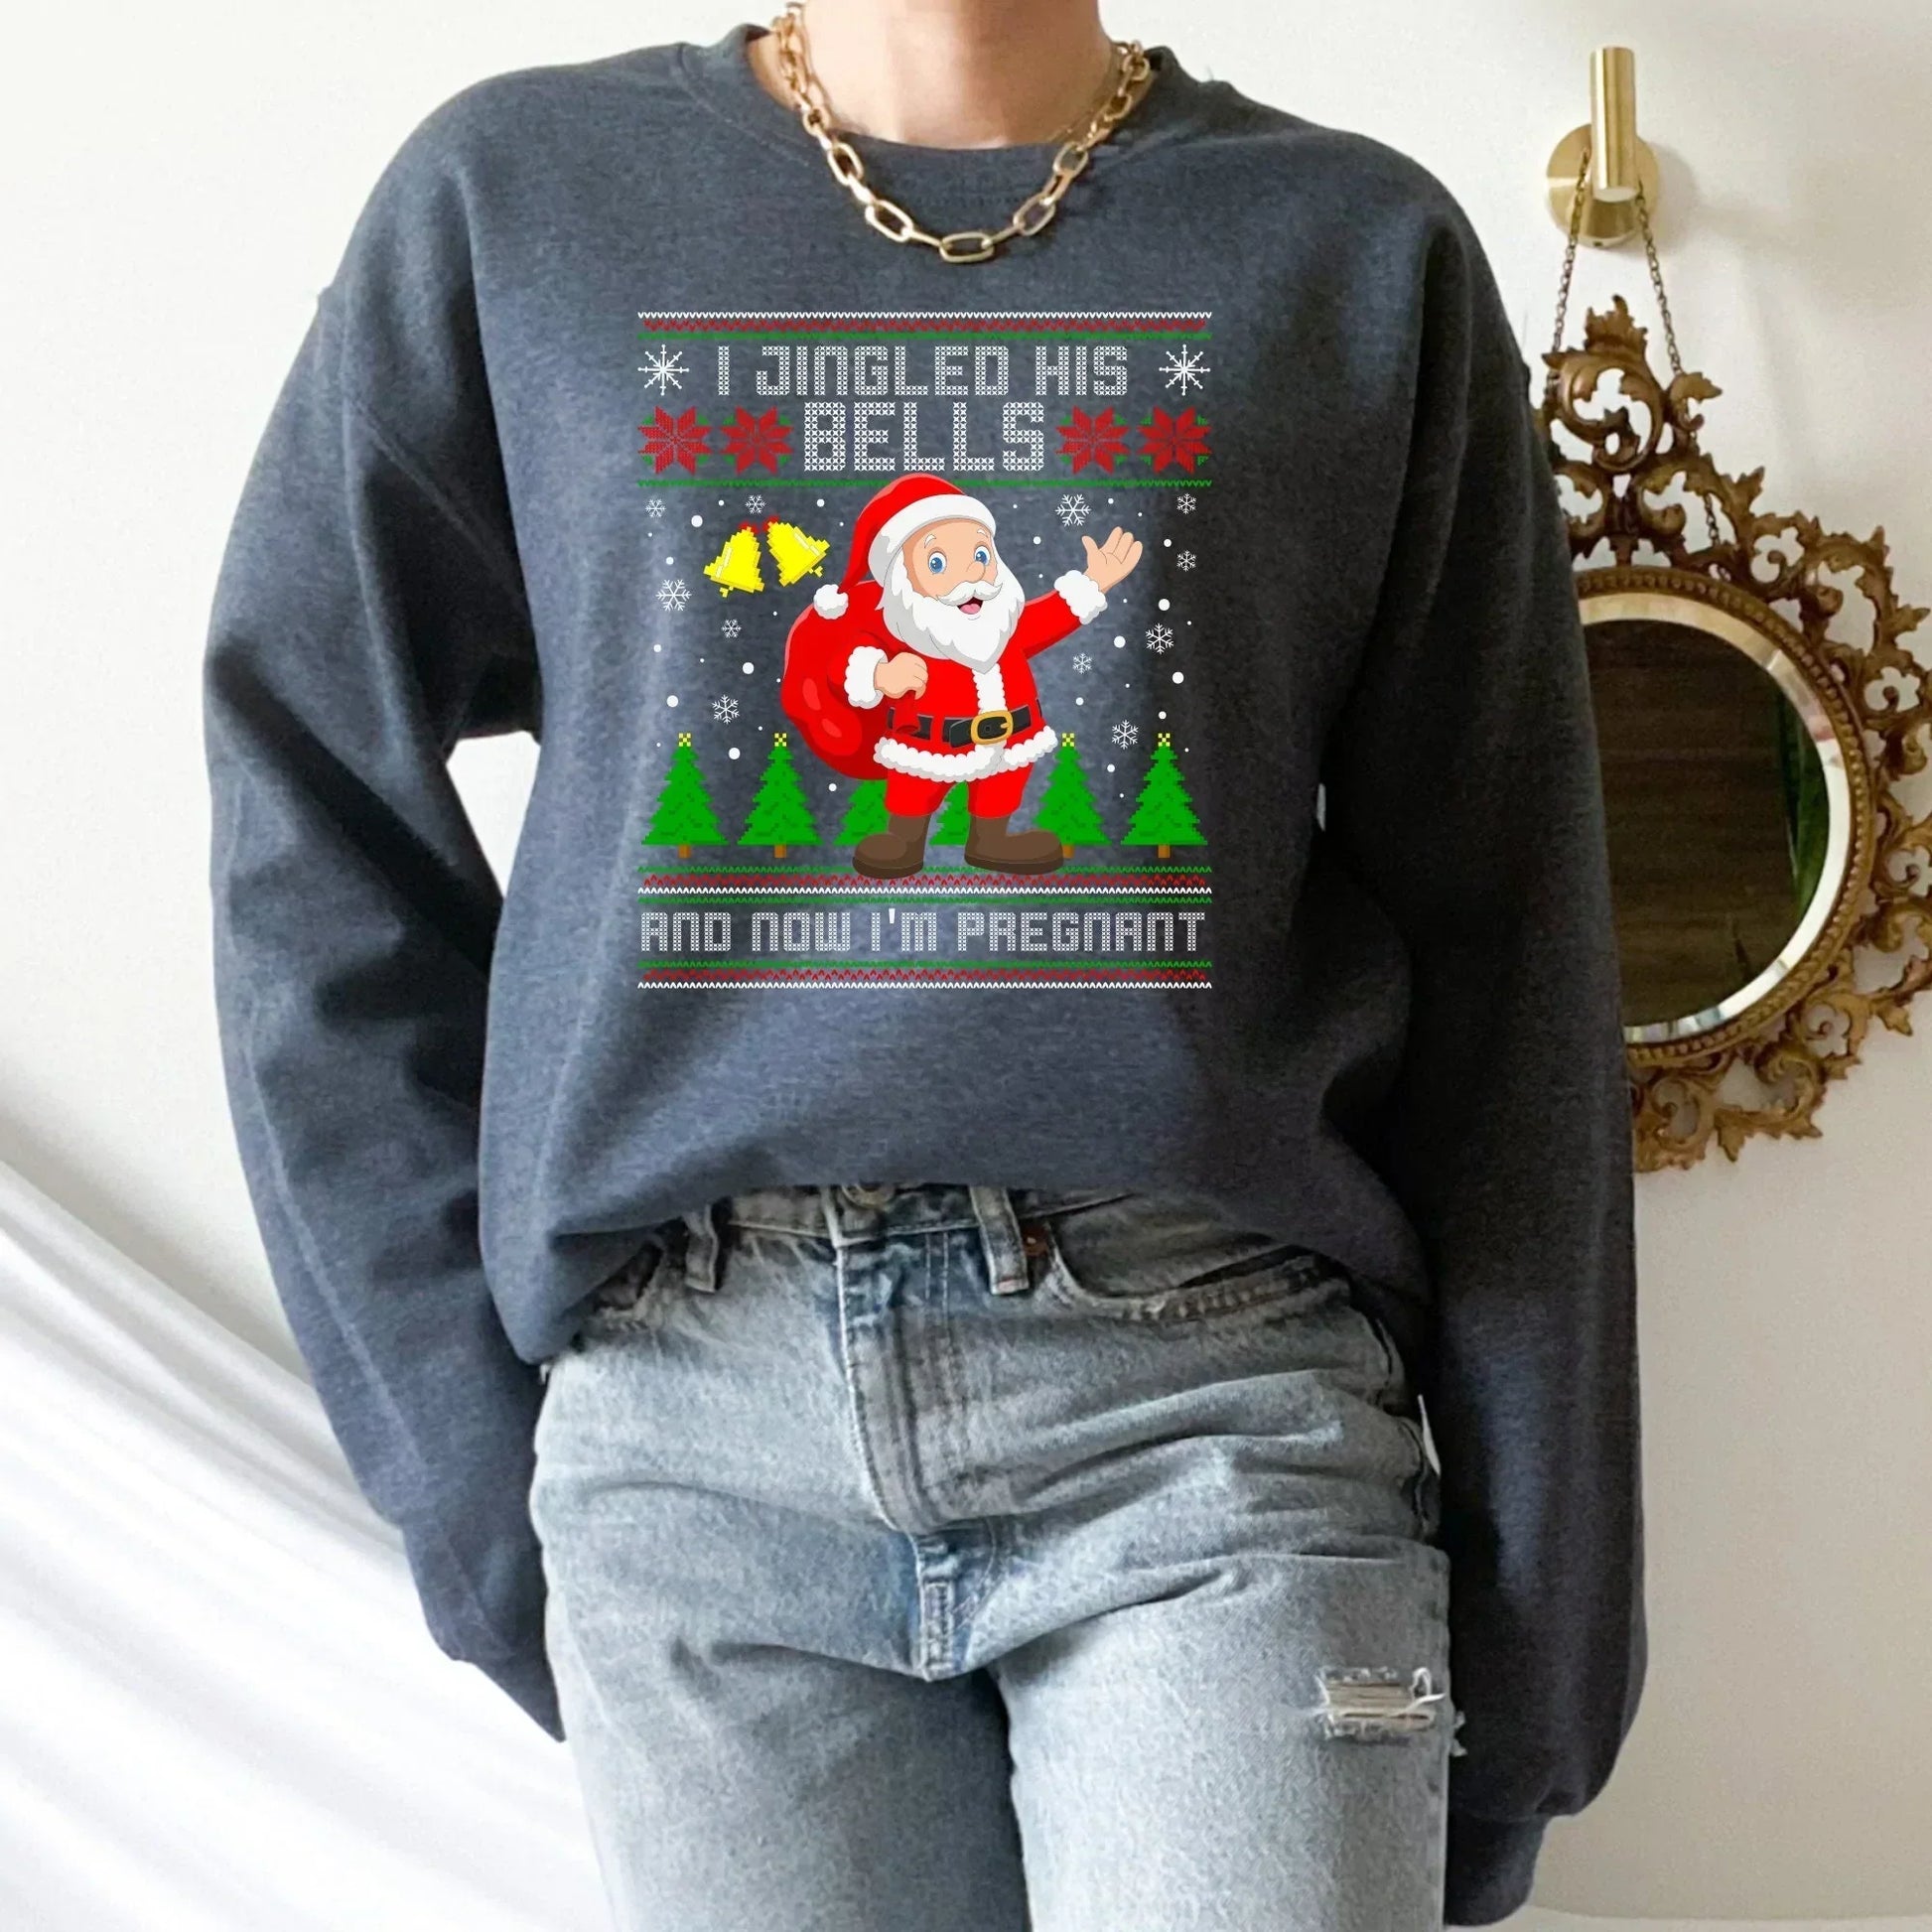 Retro Ugly Christmas Maternity Sweater, Pregnancy Reveal to Husband, Soon to Be Parents, Expecting Mother, New Baby Coming Soon Gift for Mom